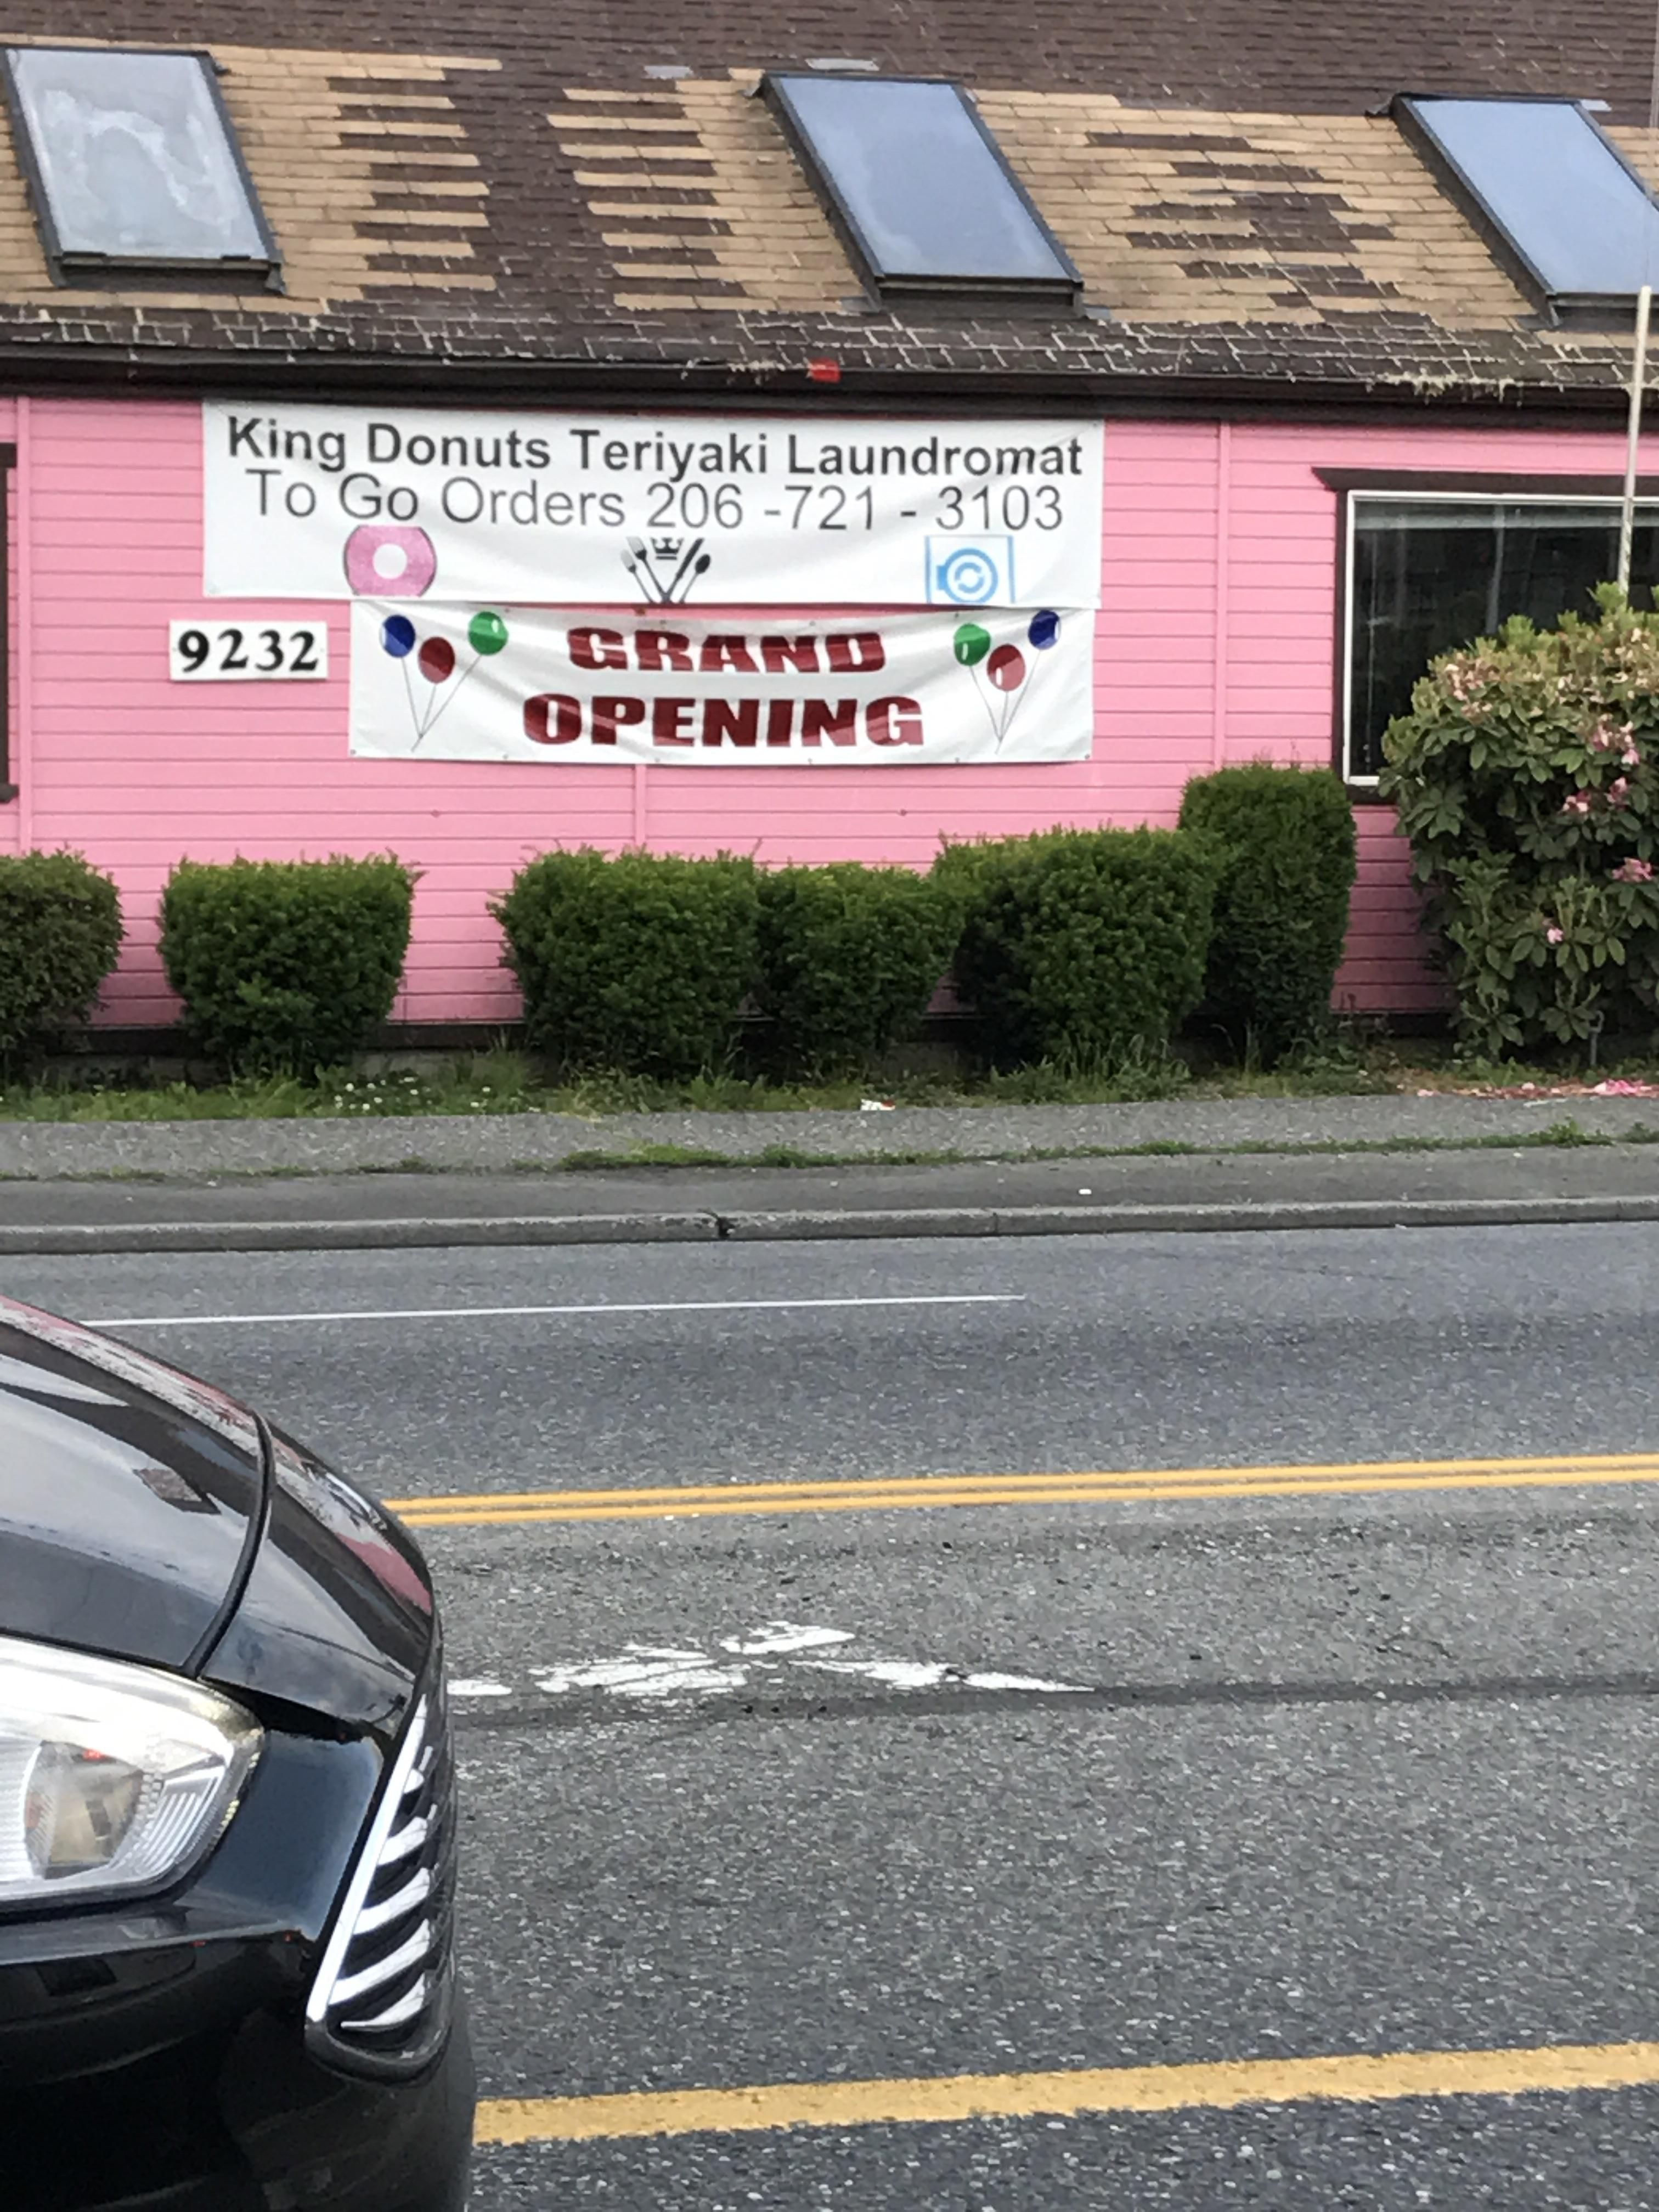 When you can't decide on a business